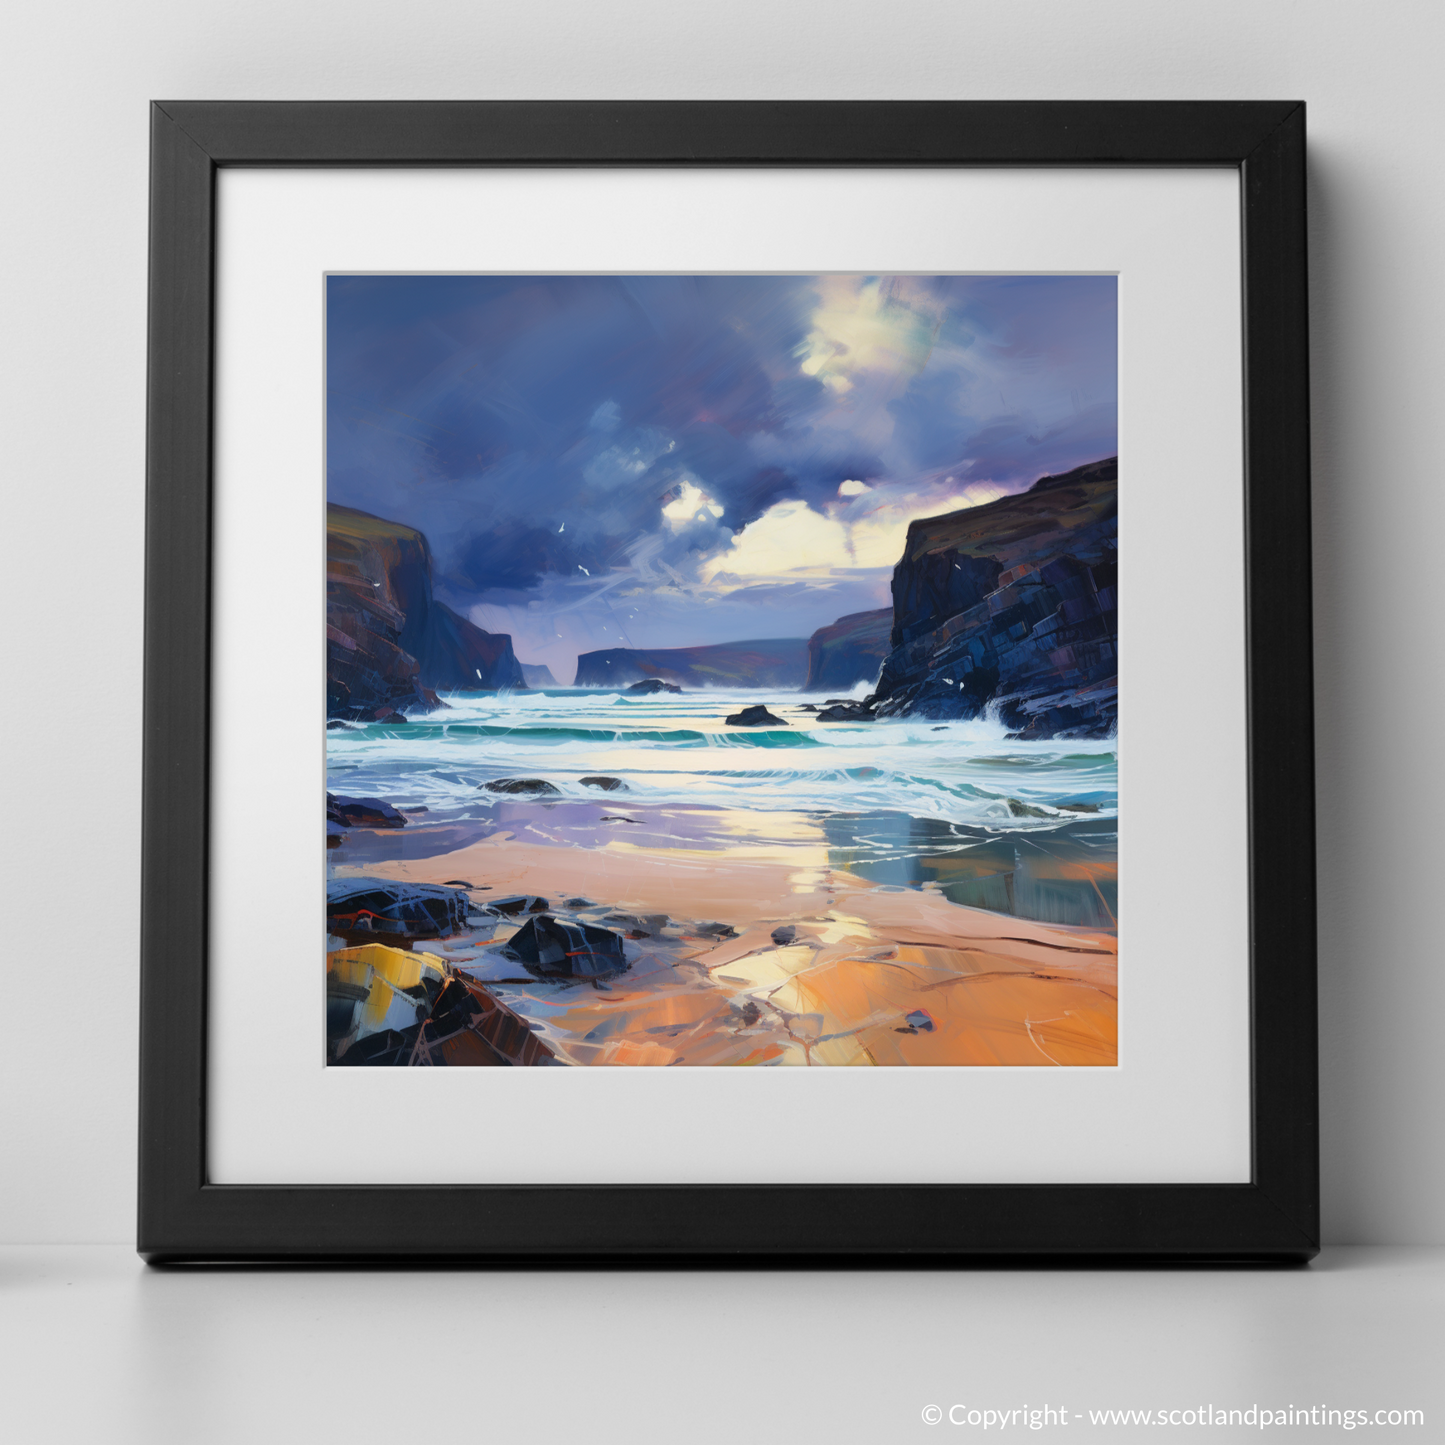 Art Print of Sandwood Bay with a stormy sky with a black frame